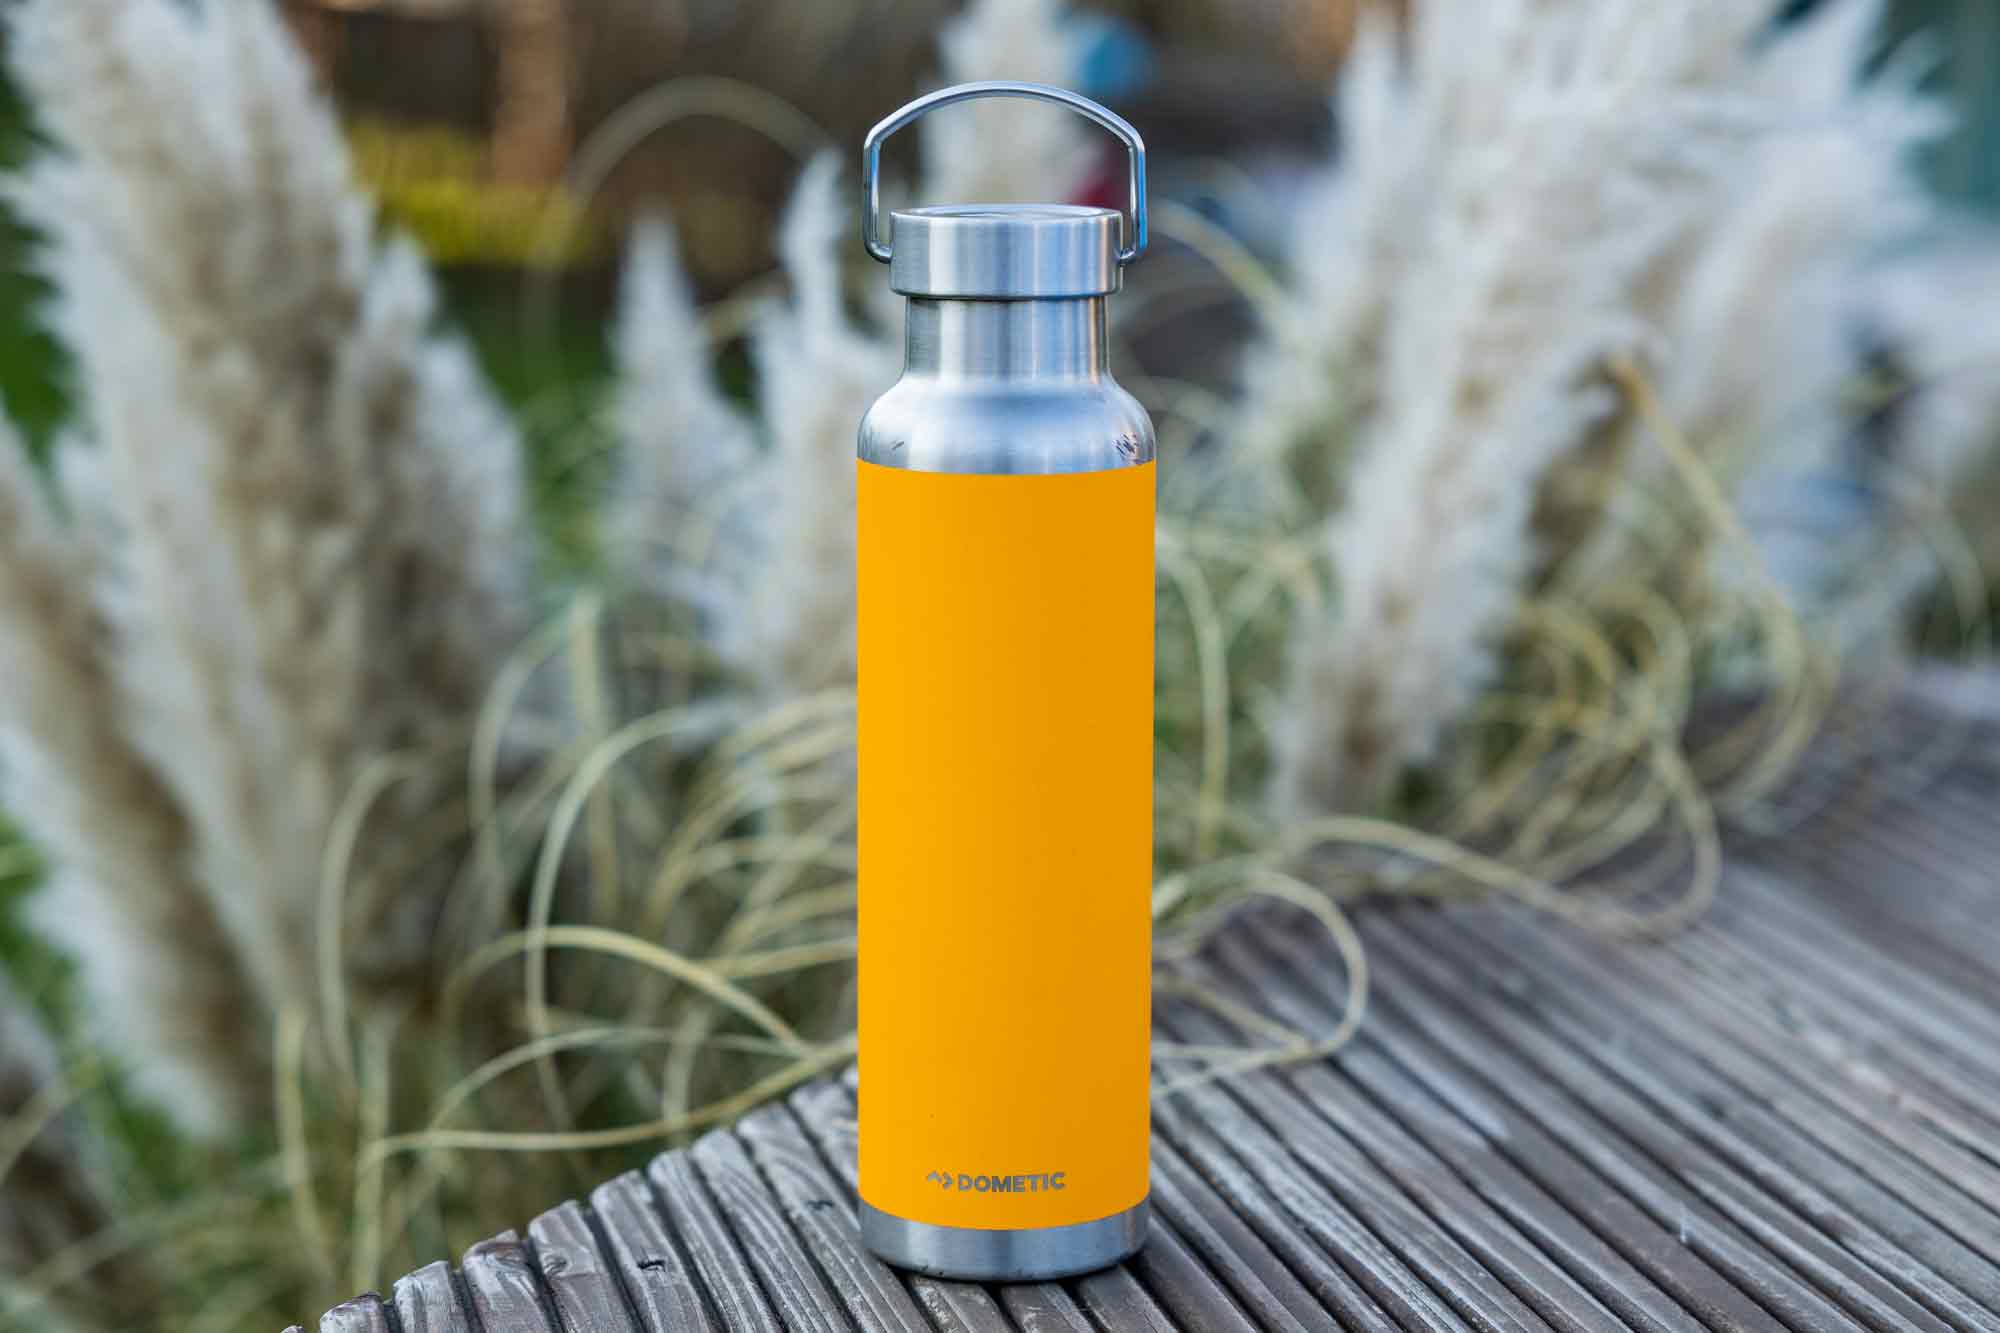 Fahrrad thermosflasche test: dometic thermo bottle 66